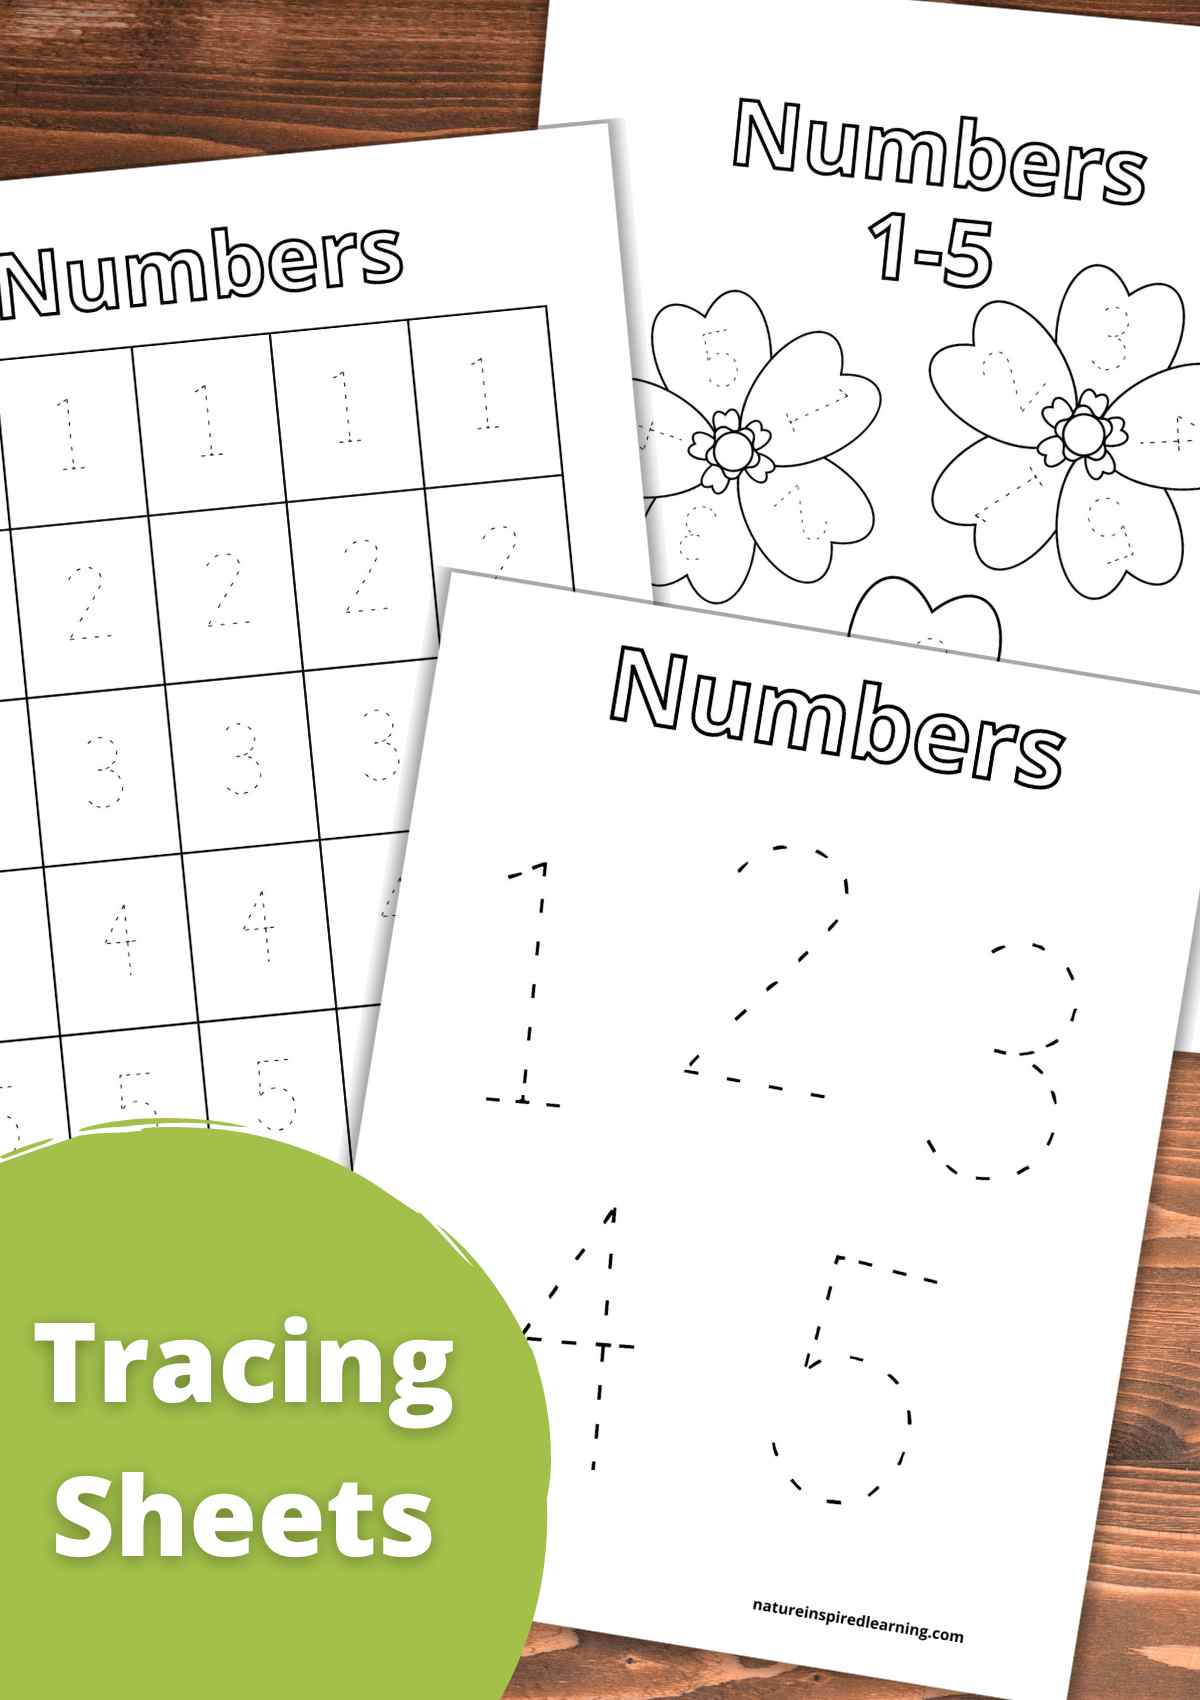 overlapping number worksheets with outlines of numbers one, two, three, four, and five on each sheet on a wooden background with a bright green circle bottom left with white text overlay.